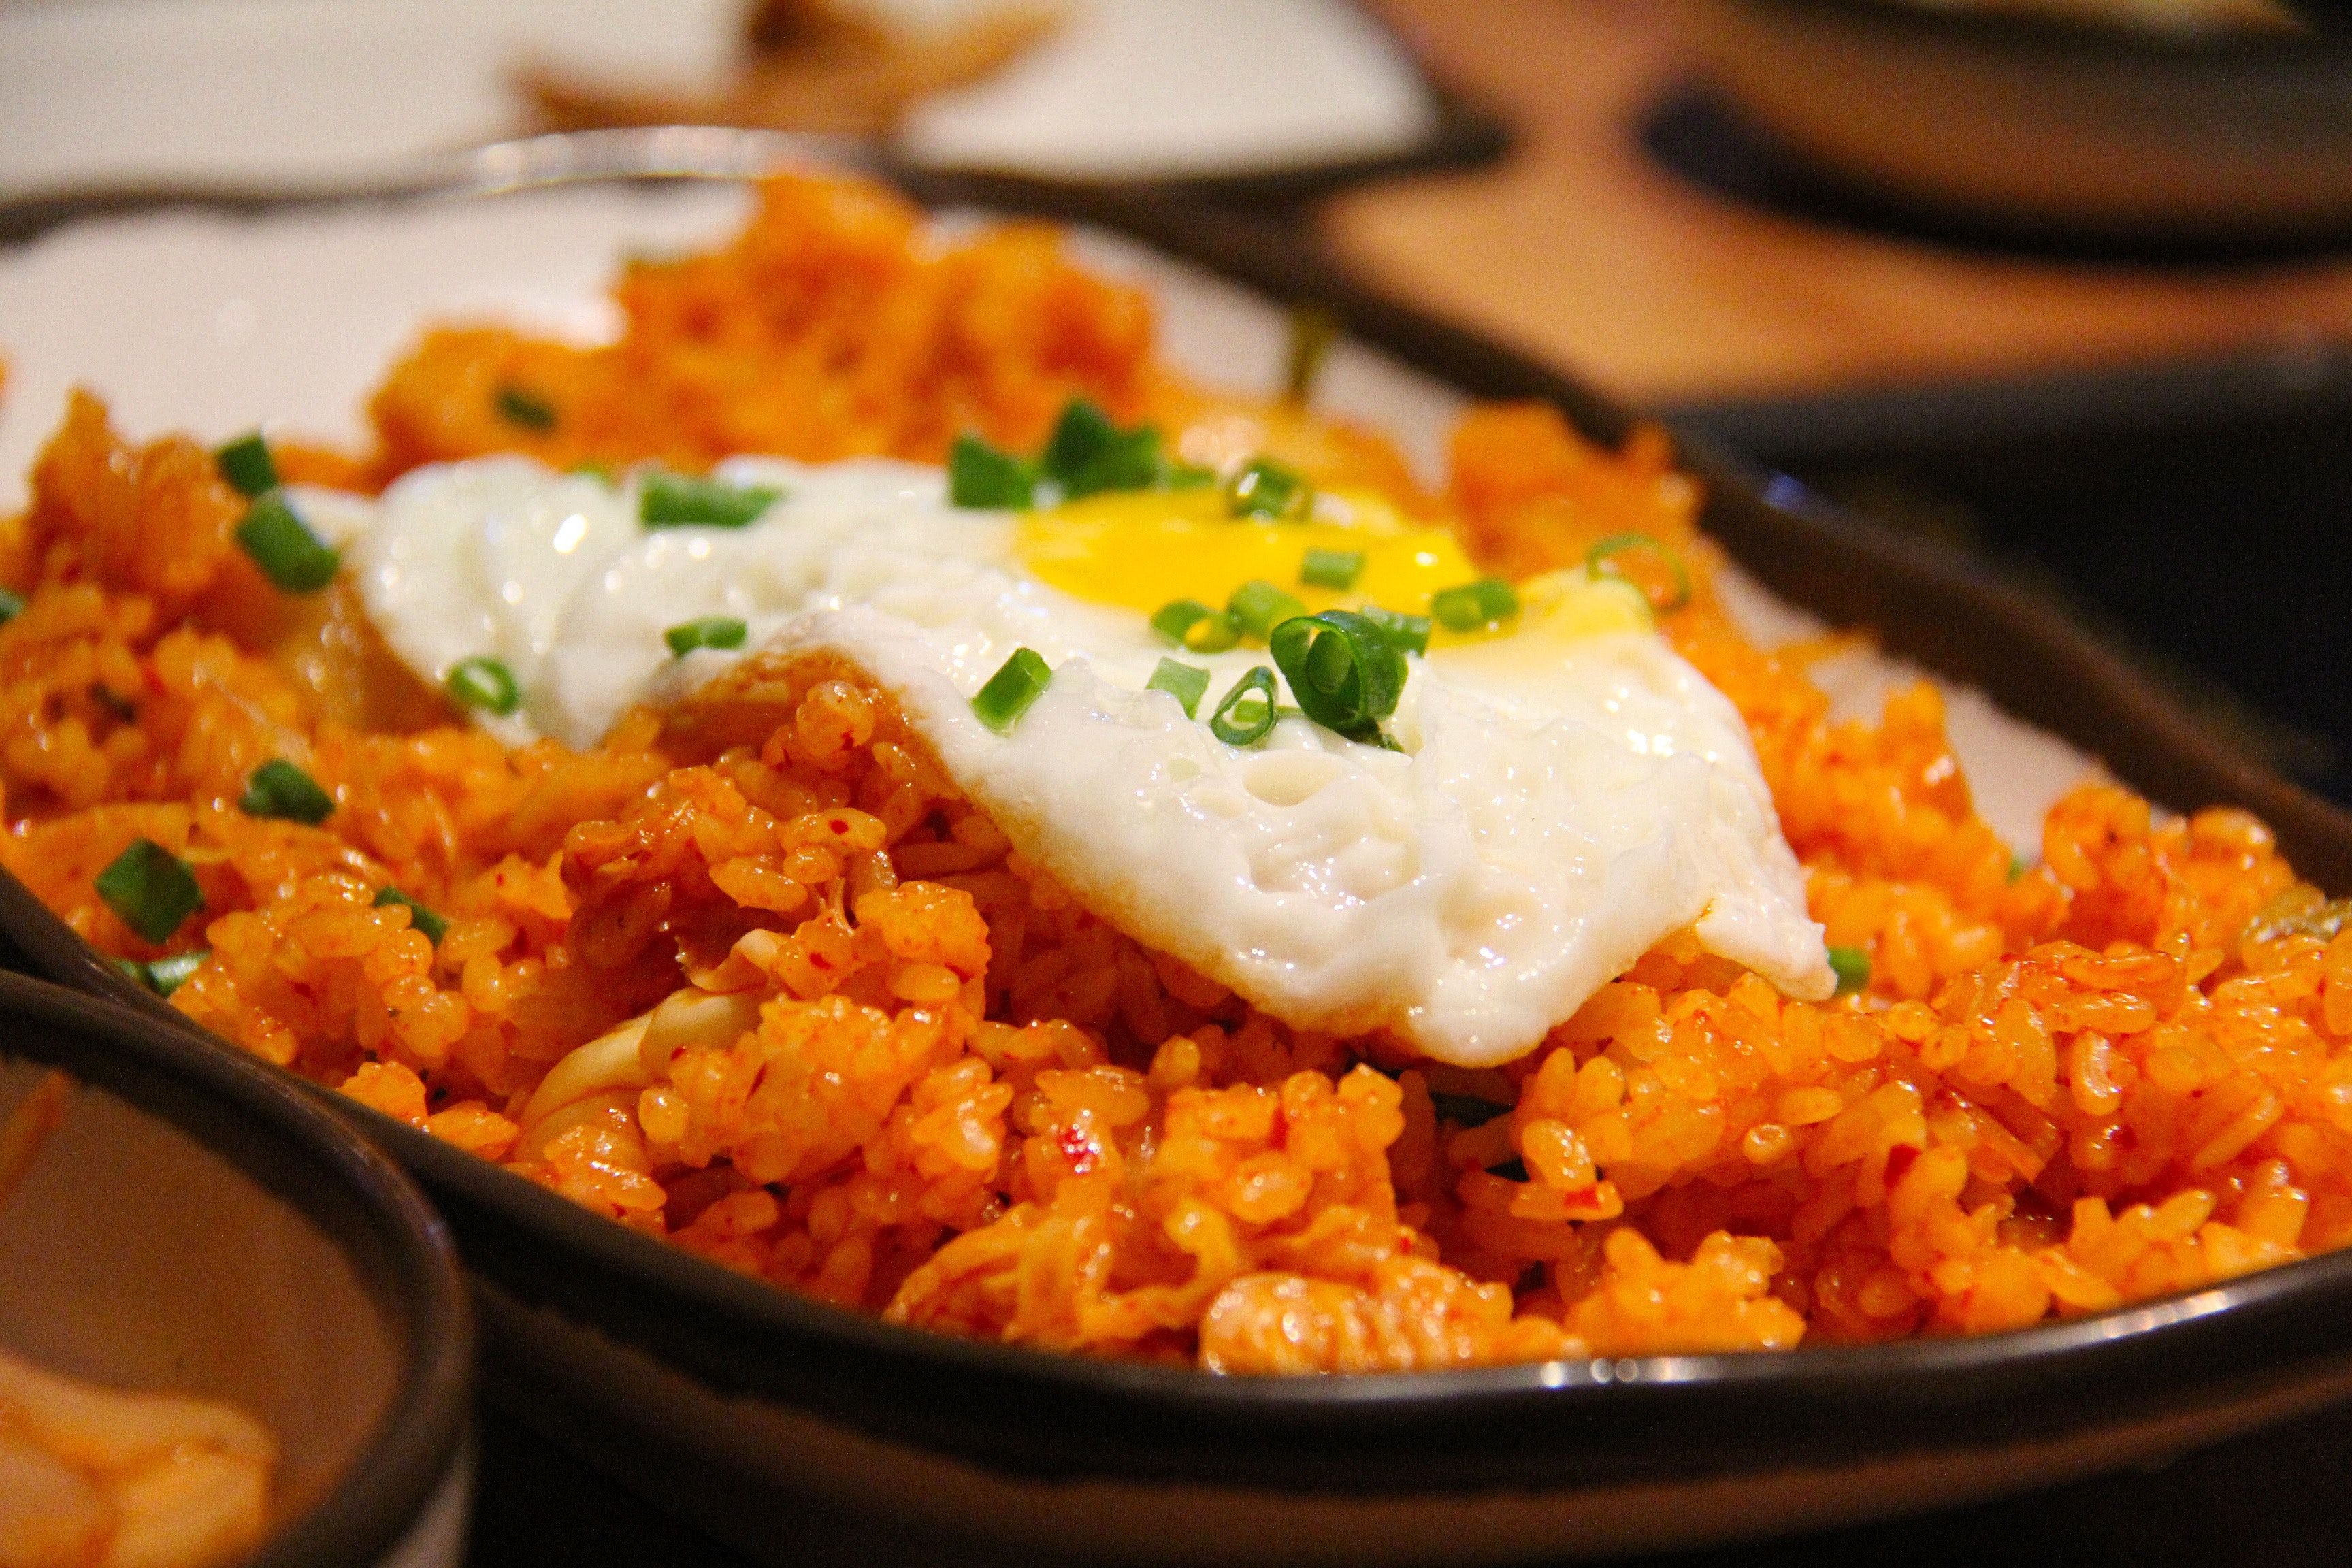 White and Yellow Sunny Side Up Egg on Fried Rice · Free